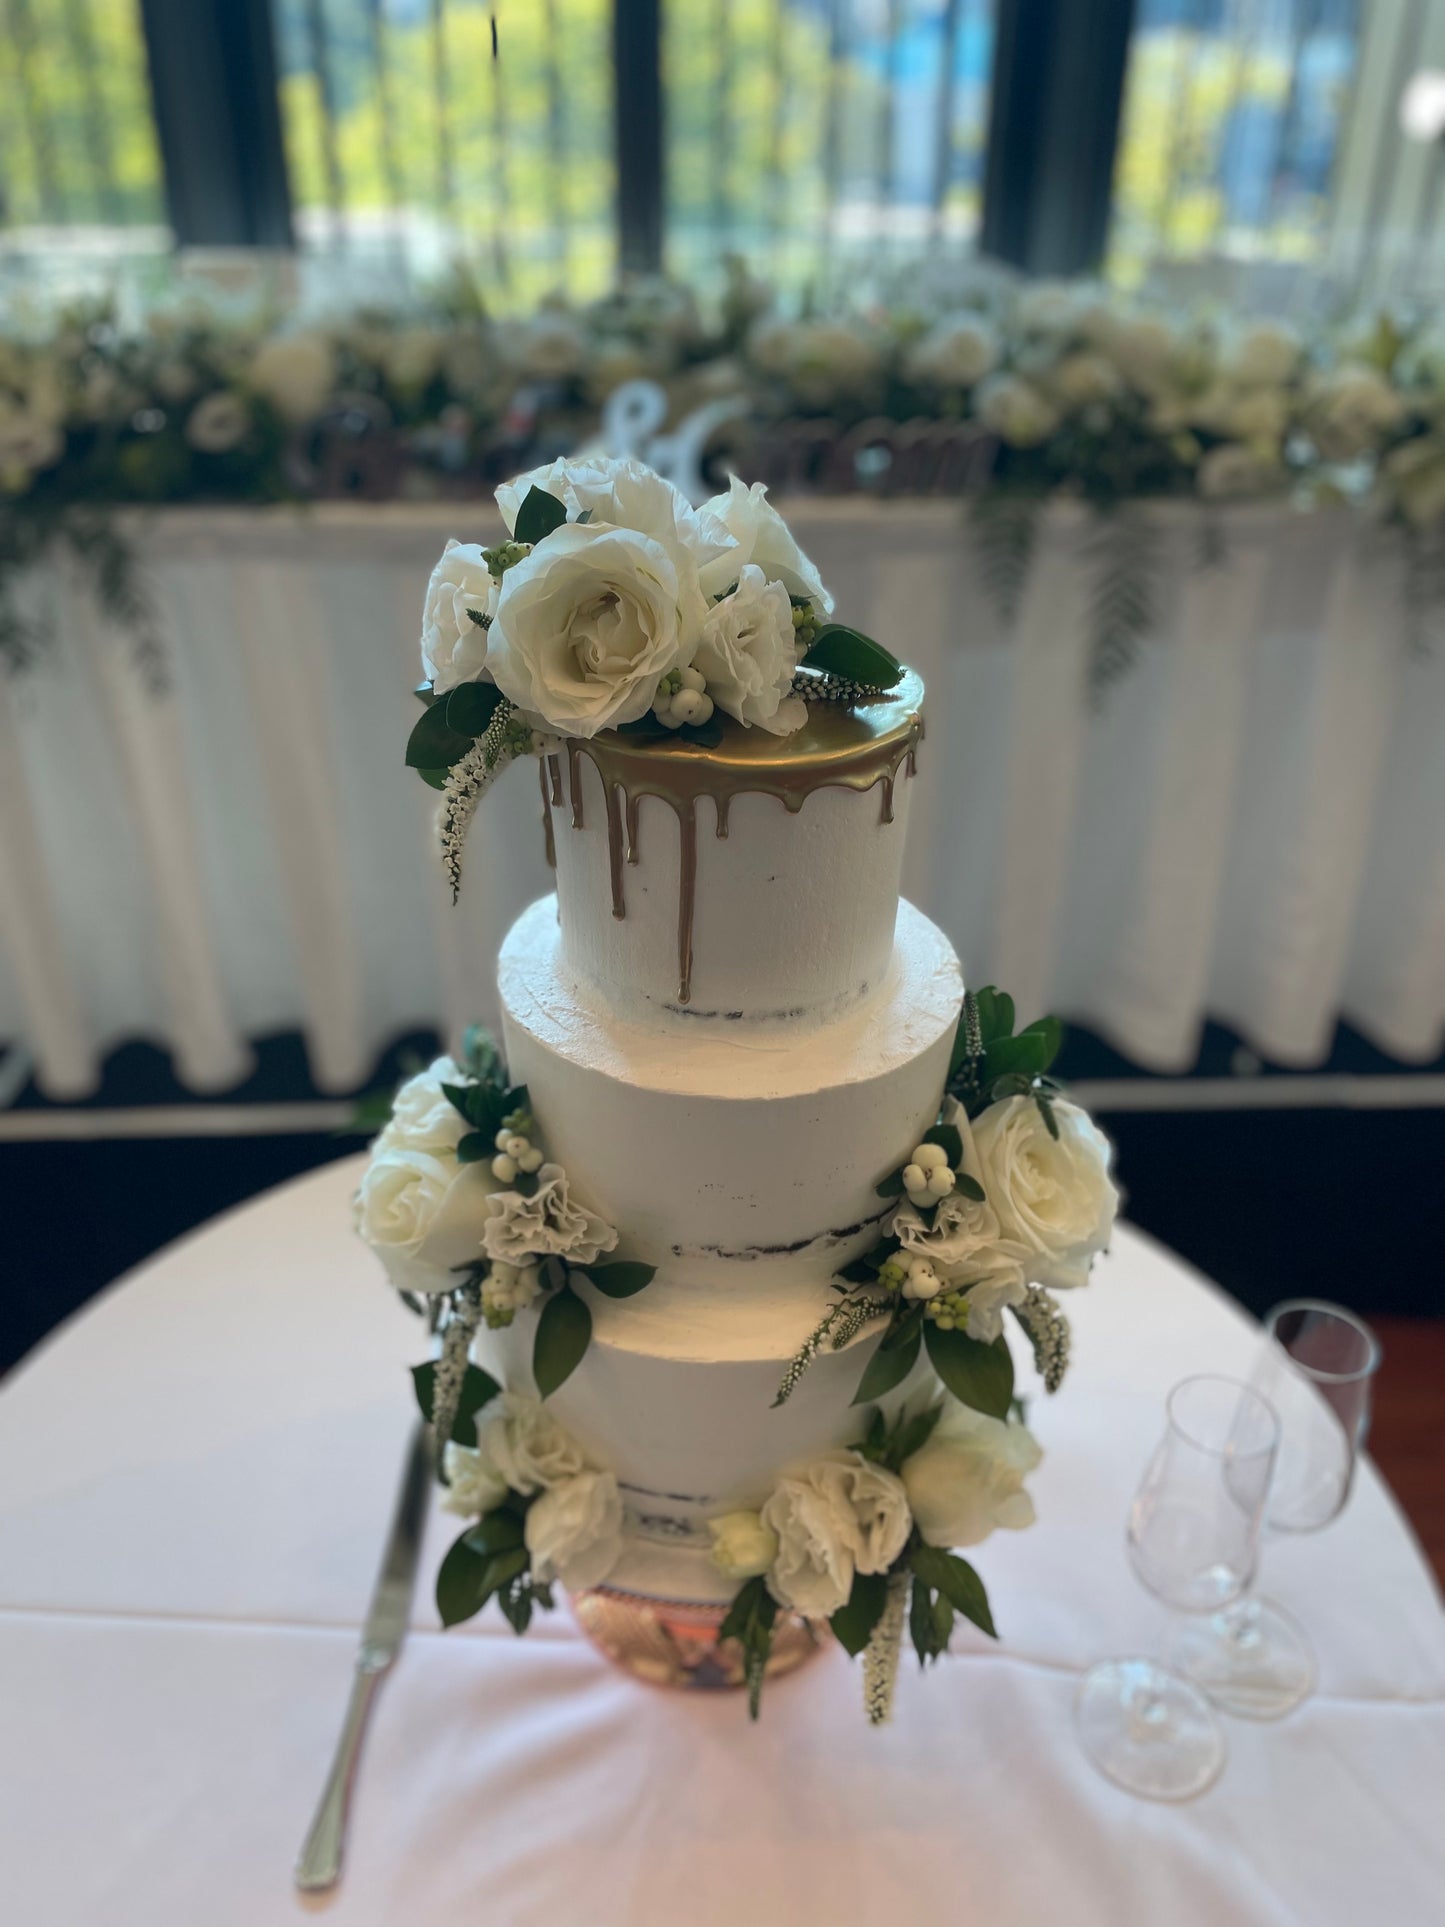 3 Tier White Buttercream with Gold Drizzle and White Flowers